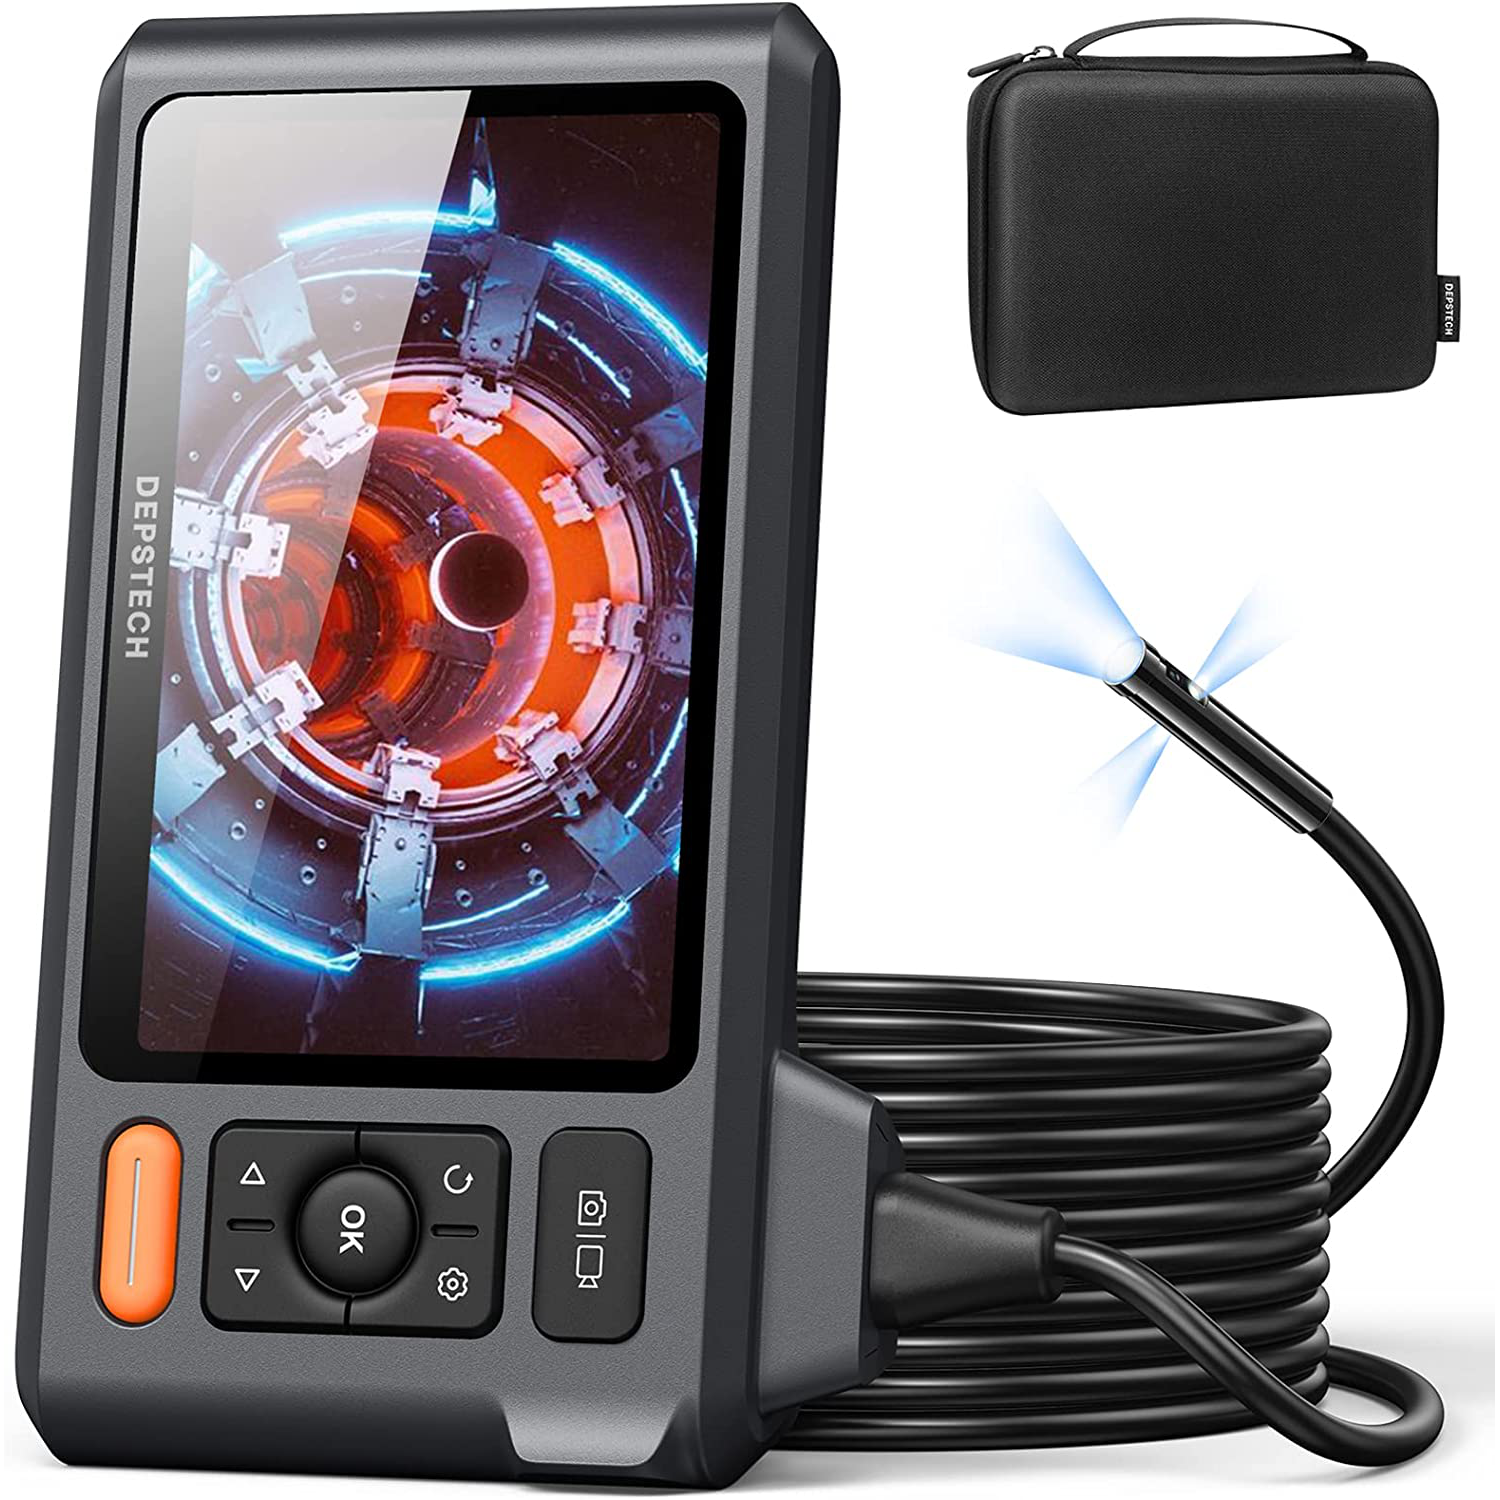 Triple Lens 1080p Borescope Inspection Camera with 5 IPS Screen